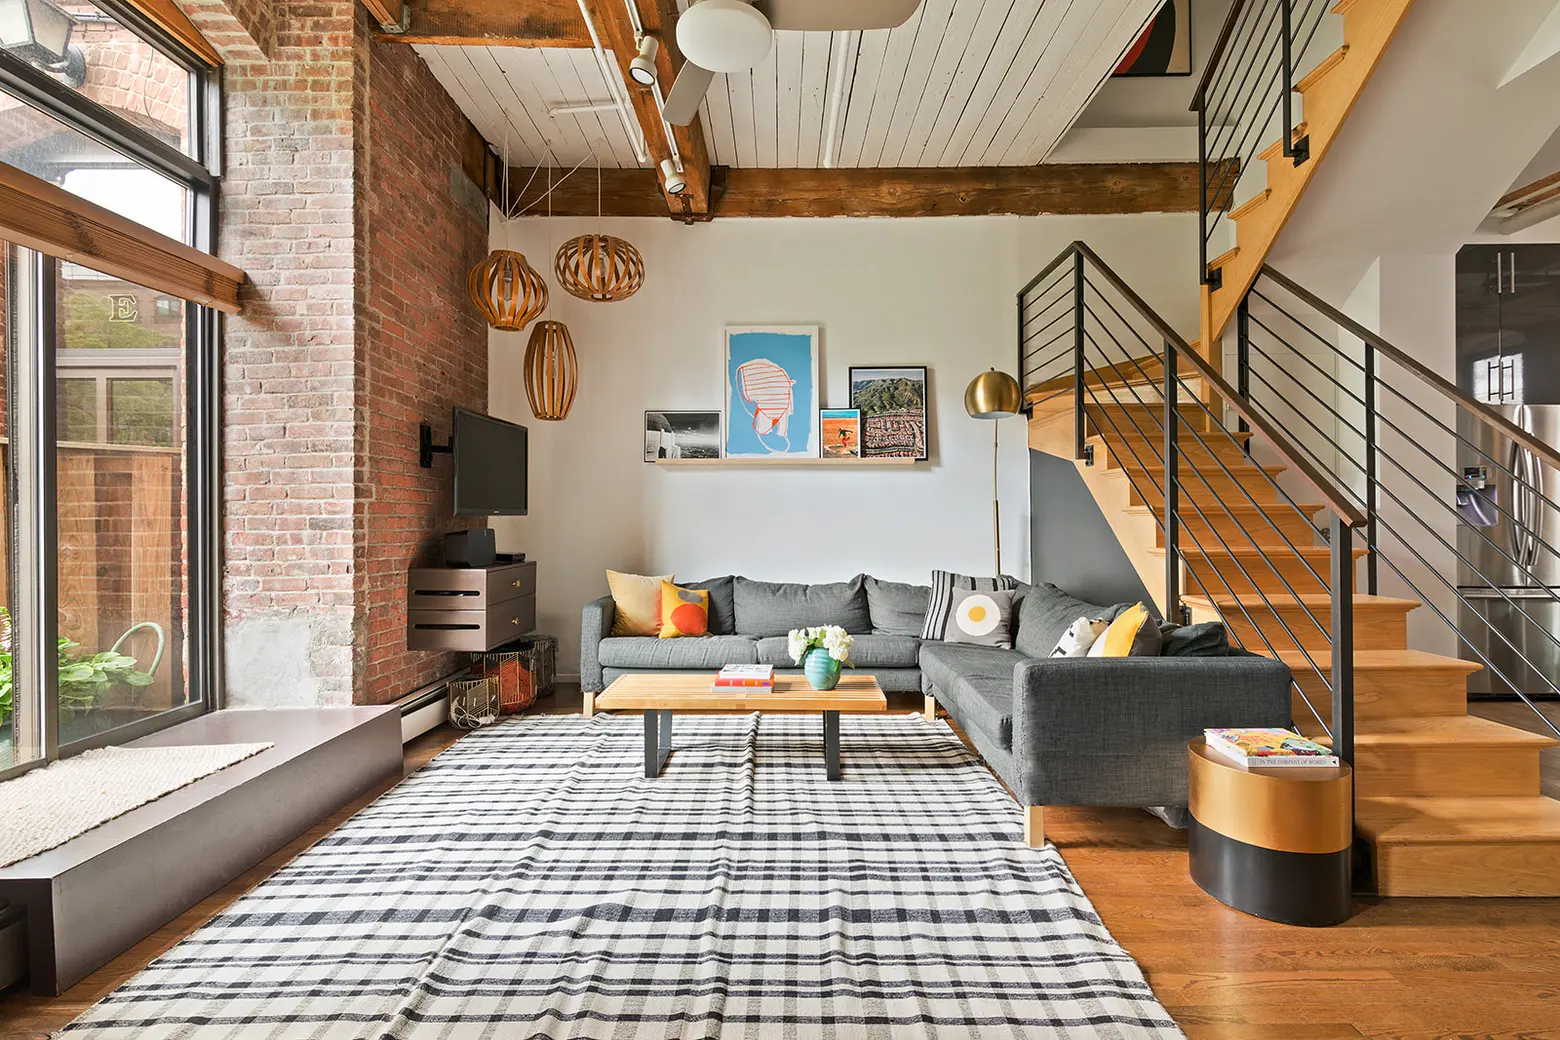 Creative touches and a charming patio set this $2.2M Park Slope loft apart